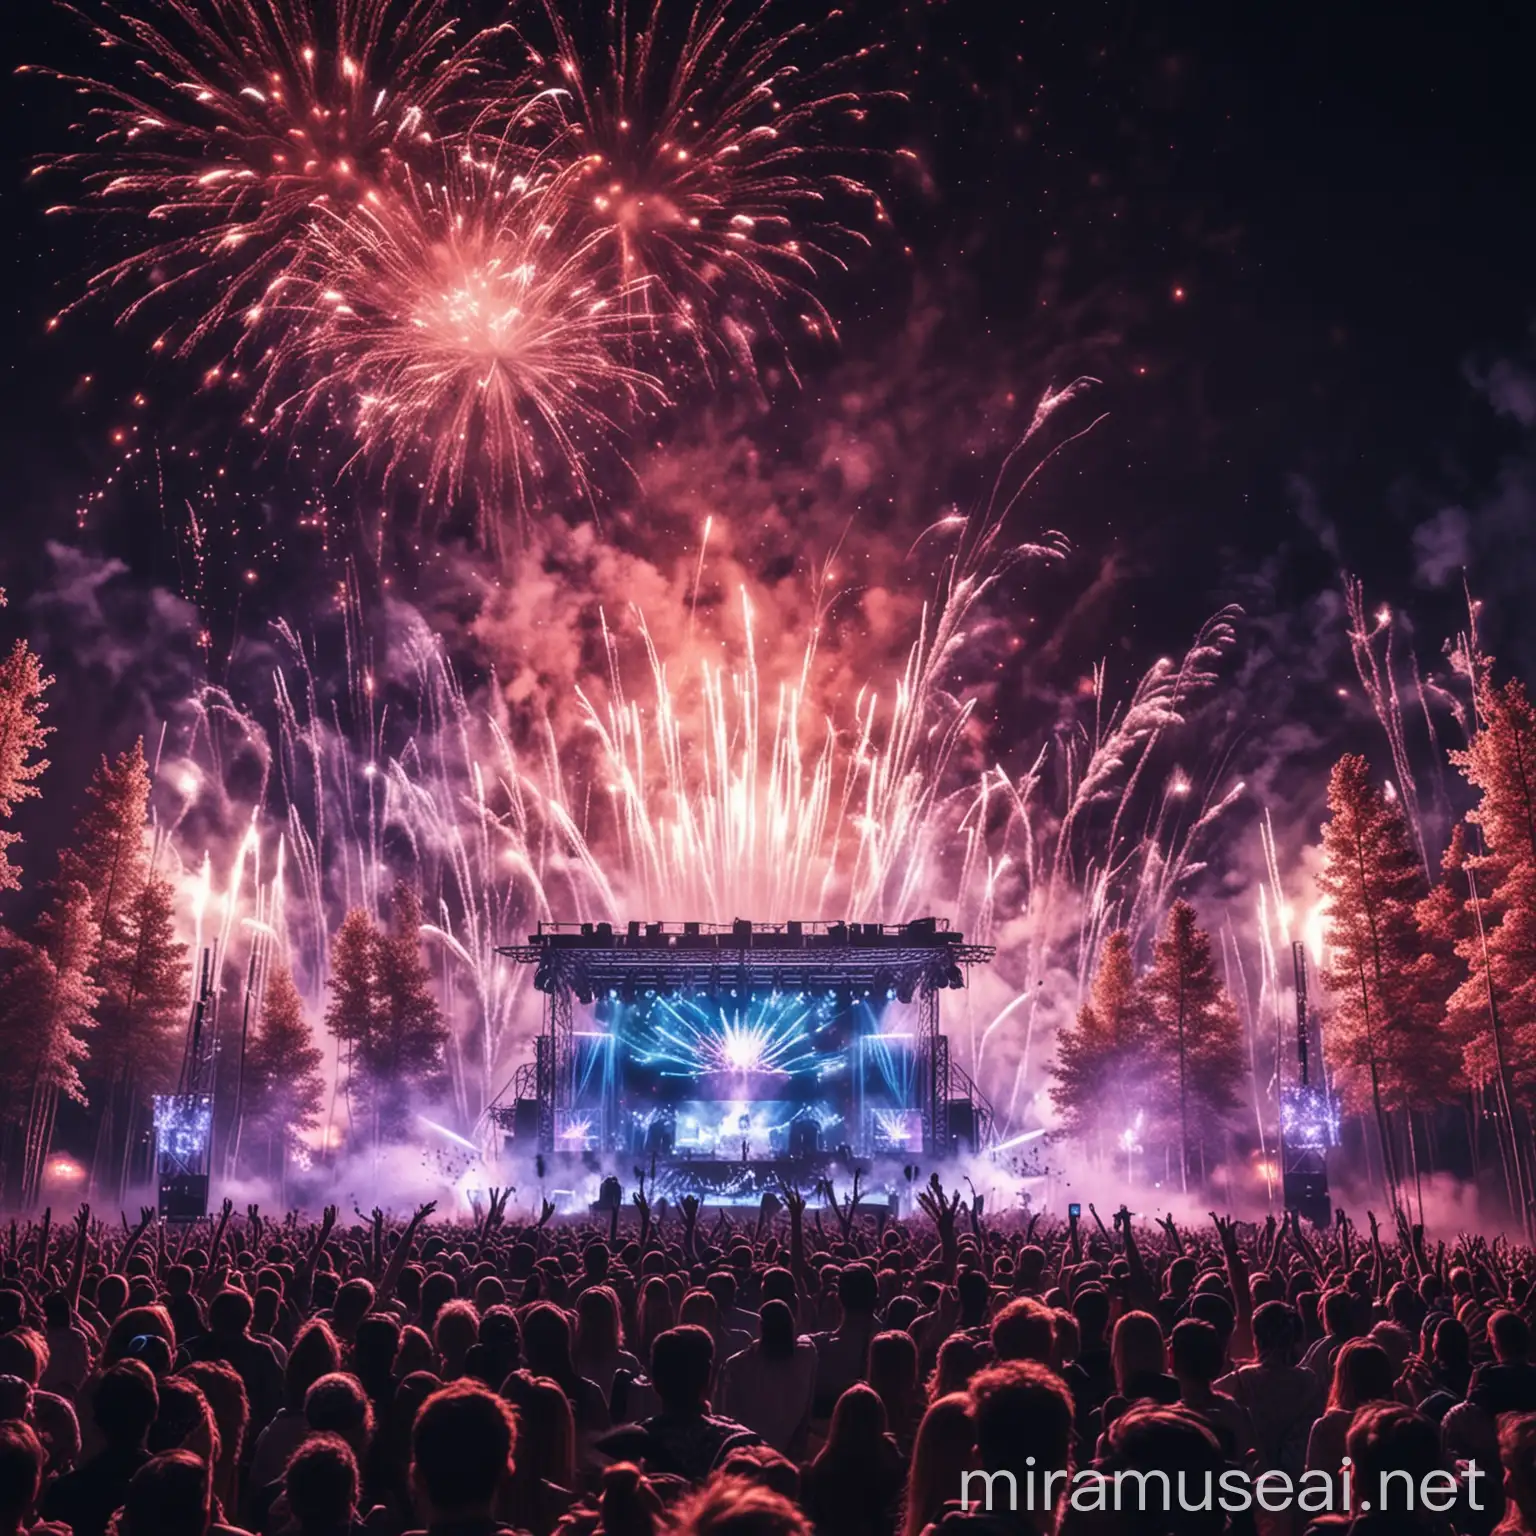 dj main stage music festival in white forest with small birds flying and colored fireworks, 8k, full hd